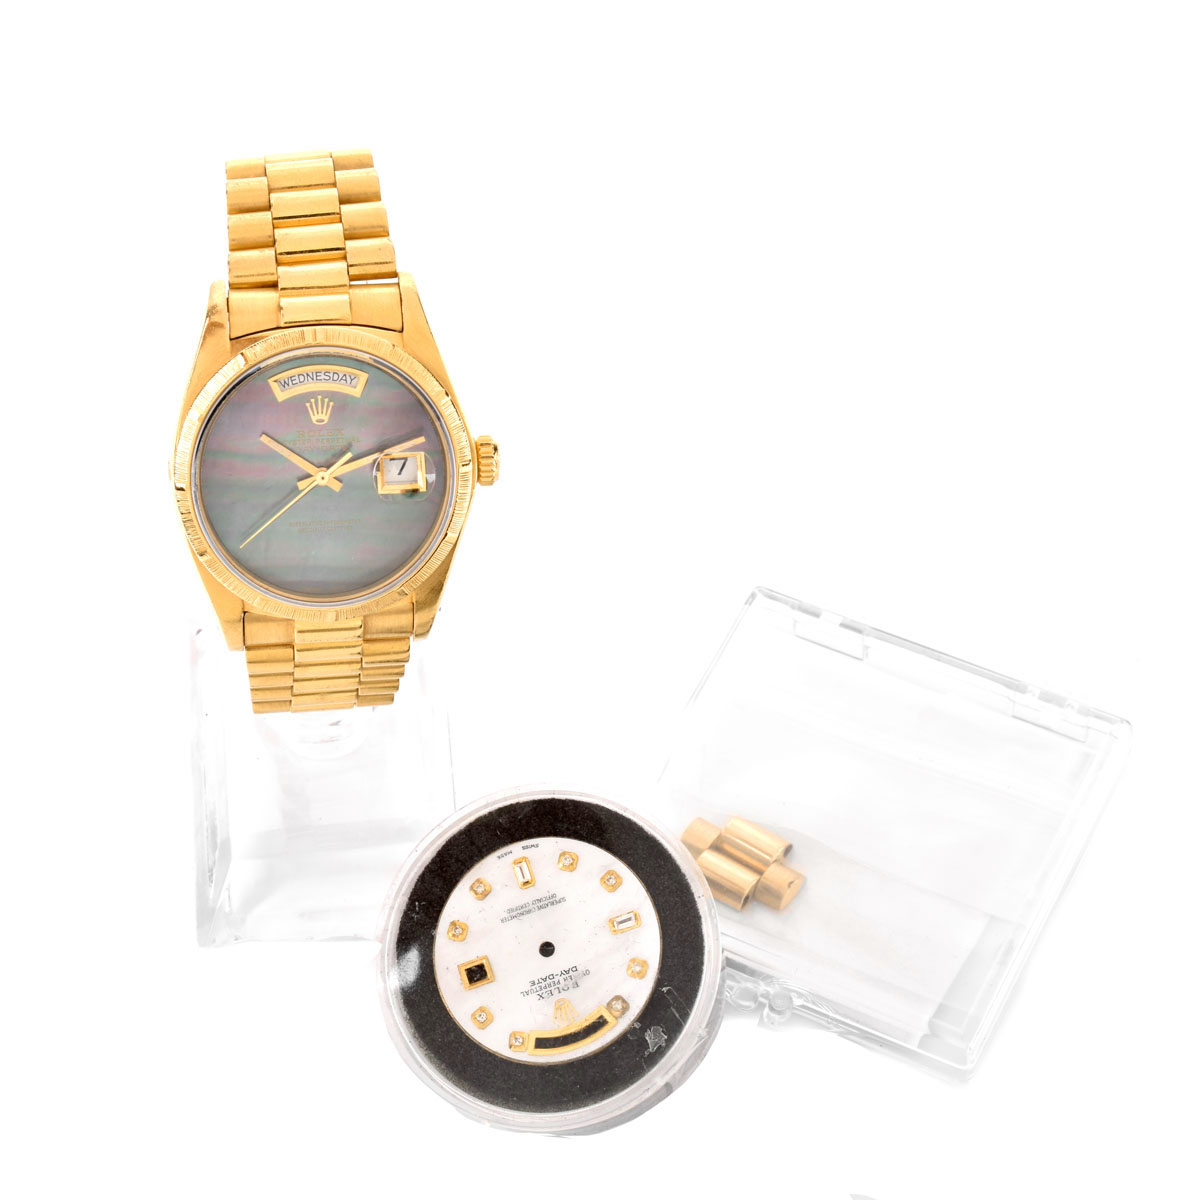 Man's Rolex 18 Karat Yellow Gold President Day-Date Bracelet Watch with Black Mother of Pearl Dial and Original White Mother of Pearl Dial with Diamond Hour Markers, Extra Bracelet Links. Case measures 36mm.